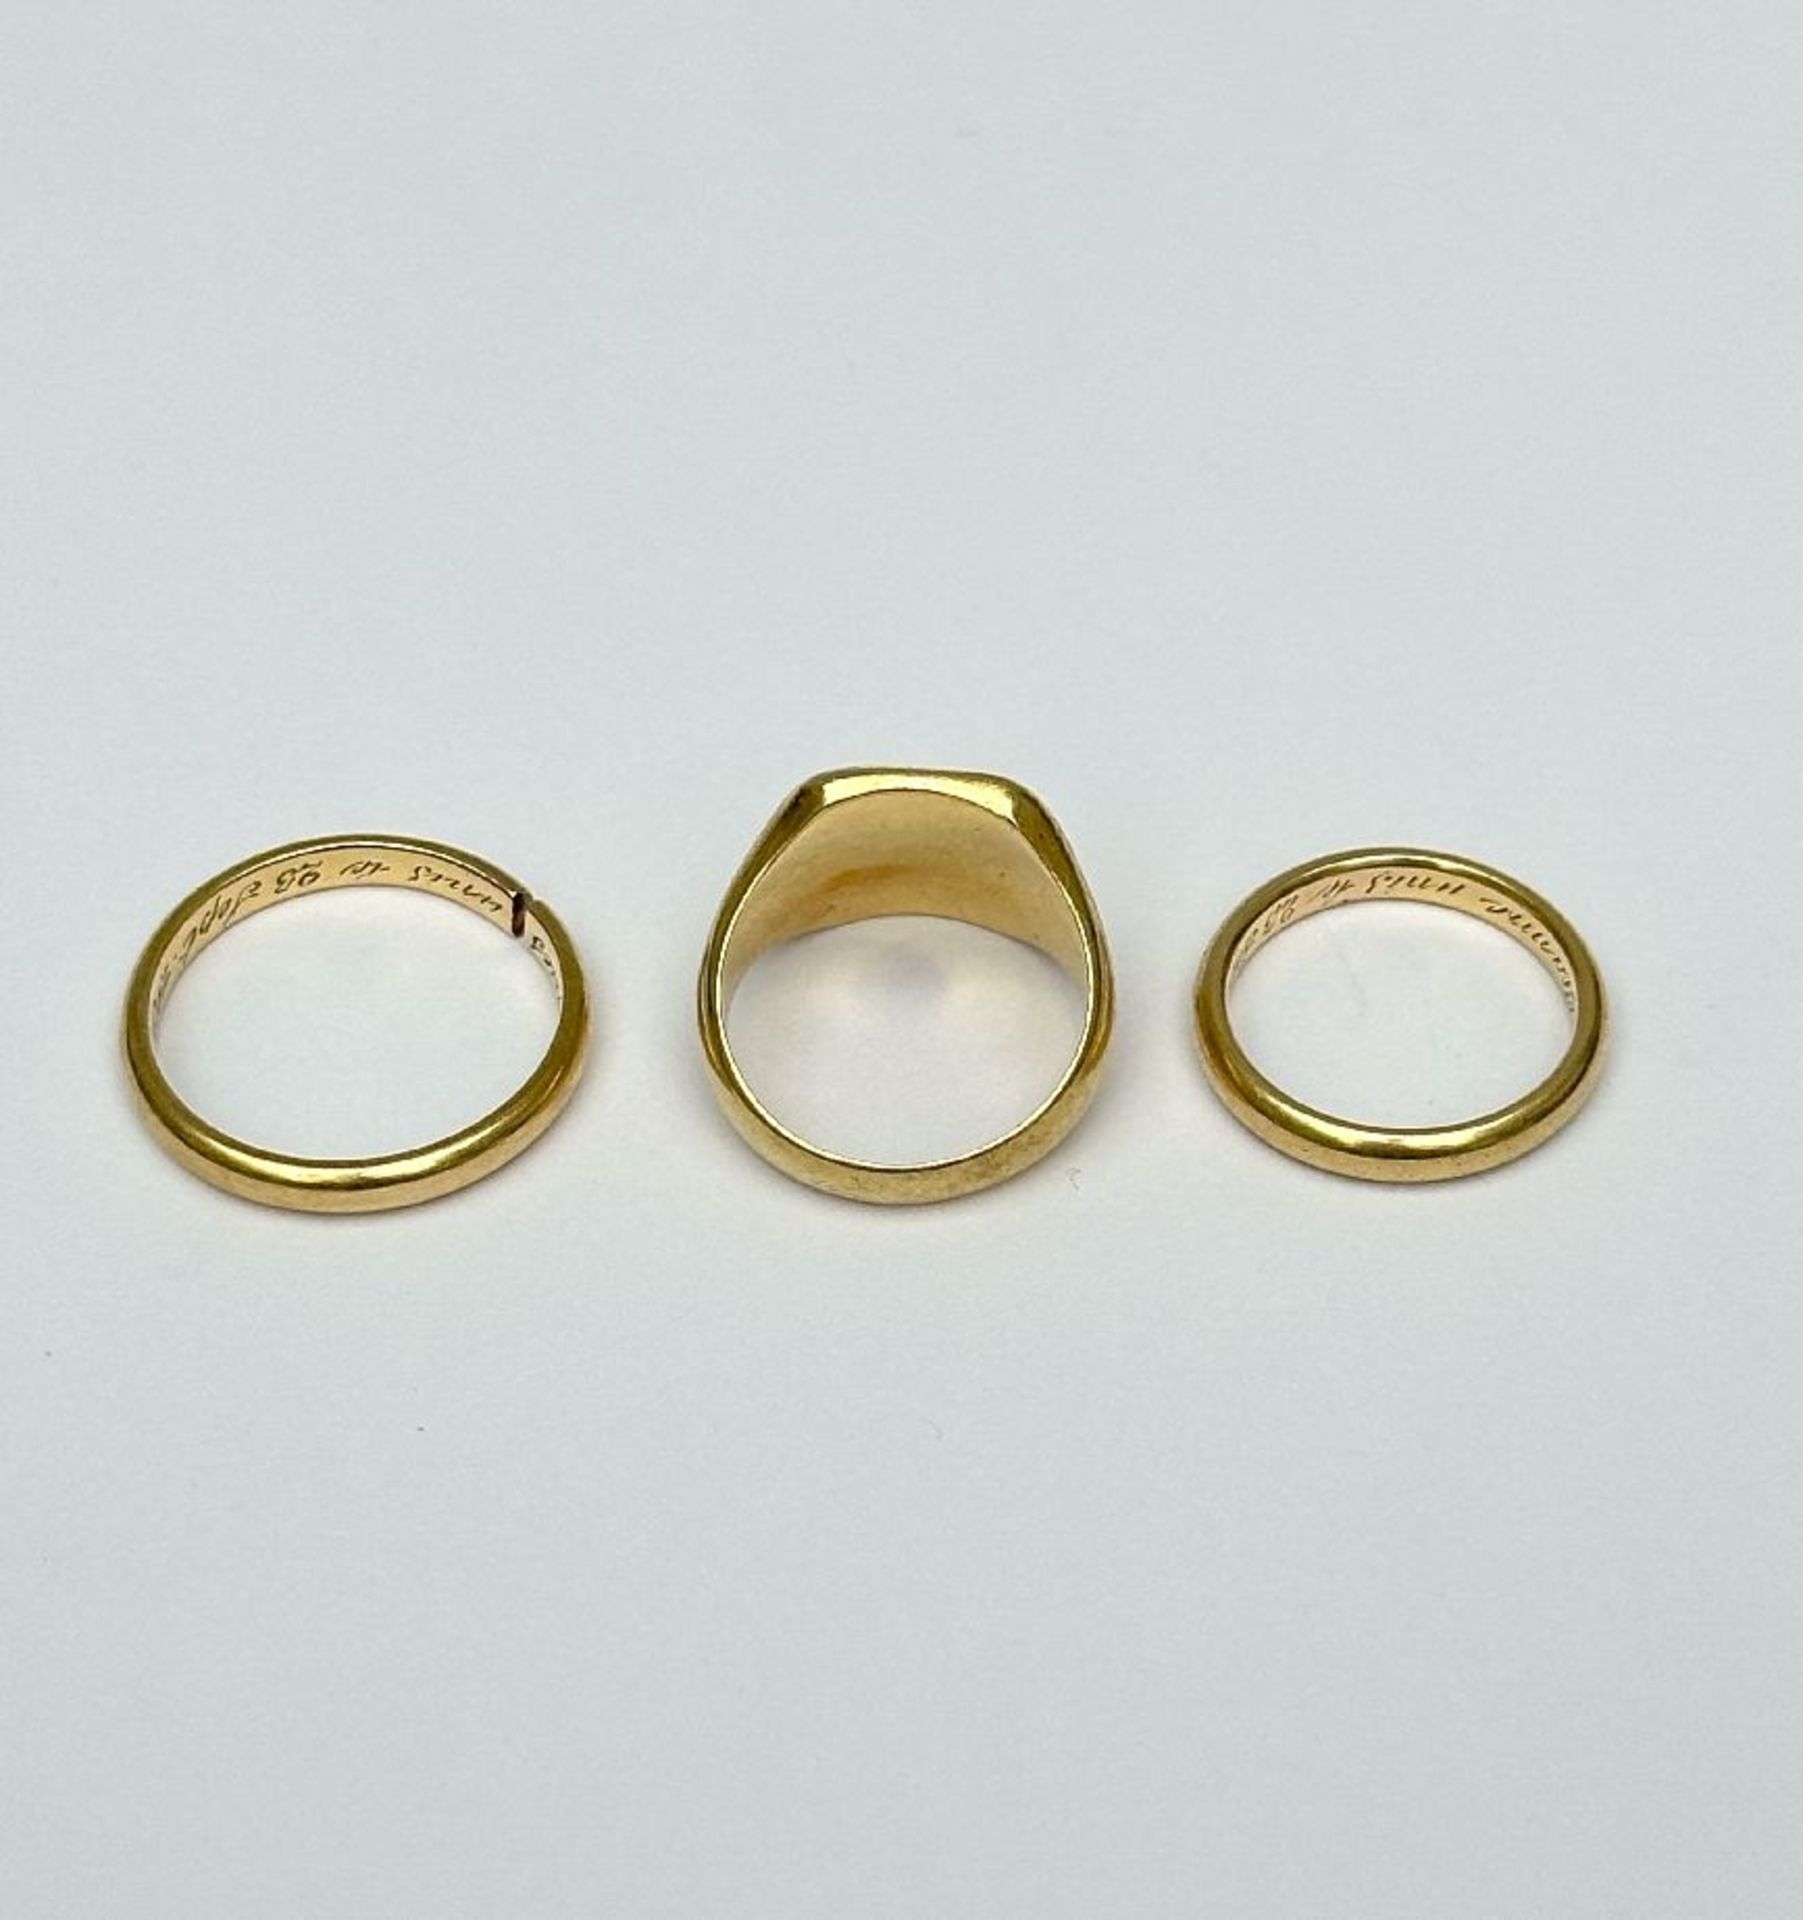 Lot: three gold rings - Image 2 of 2